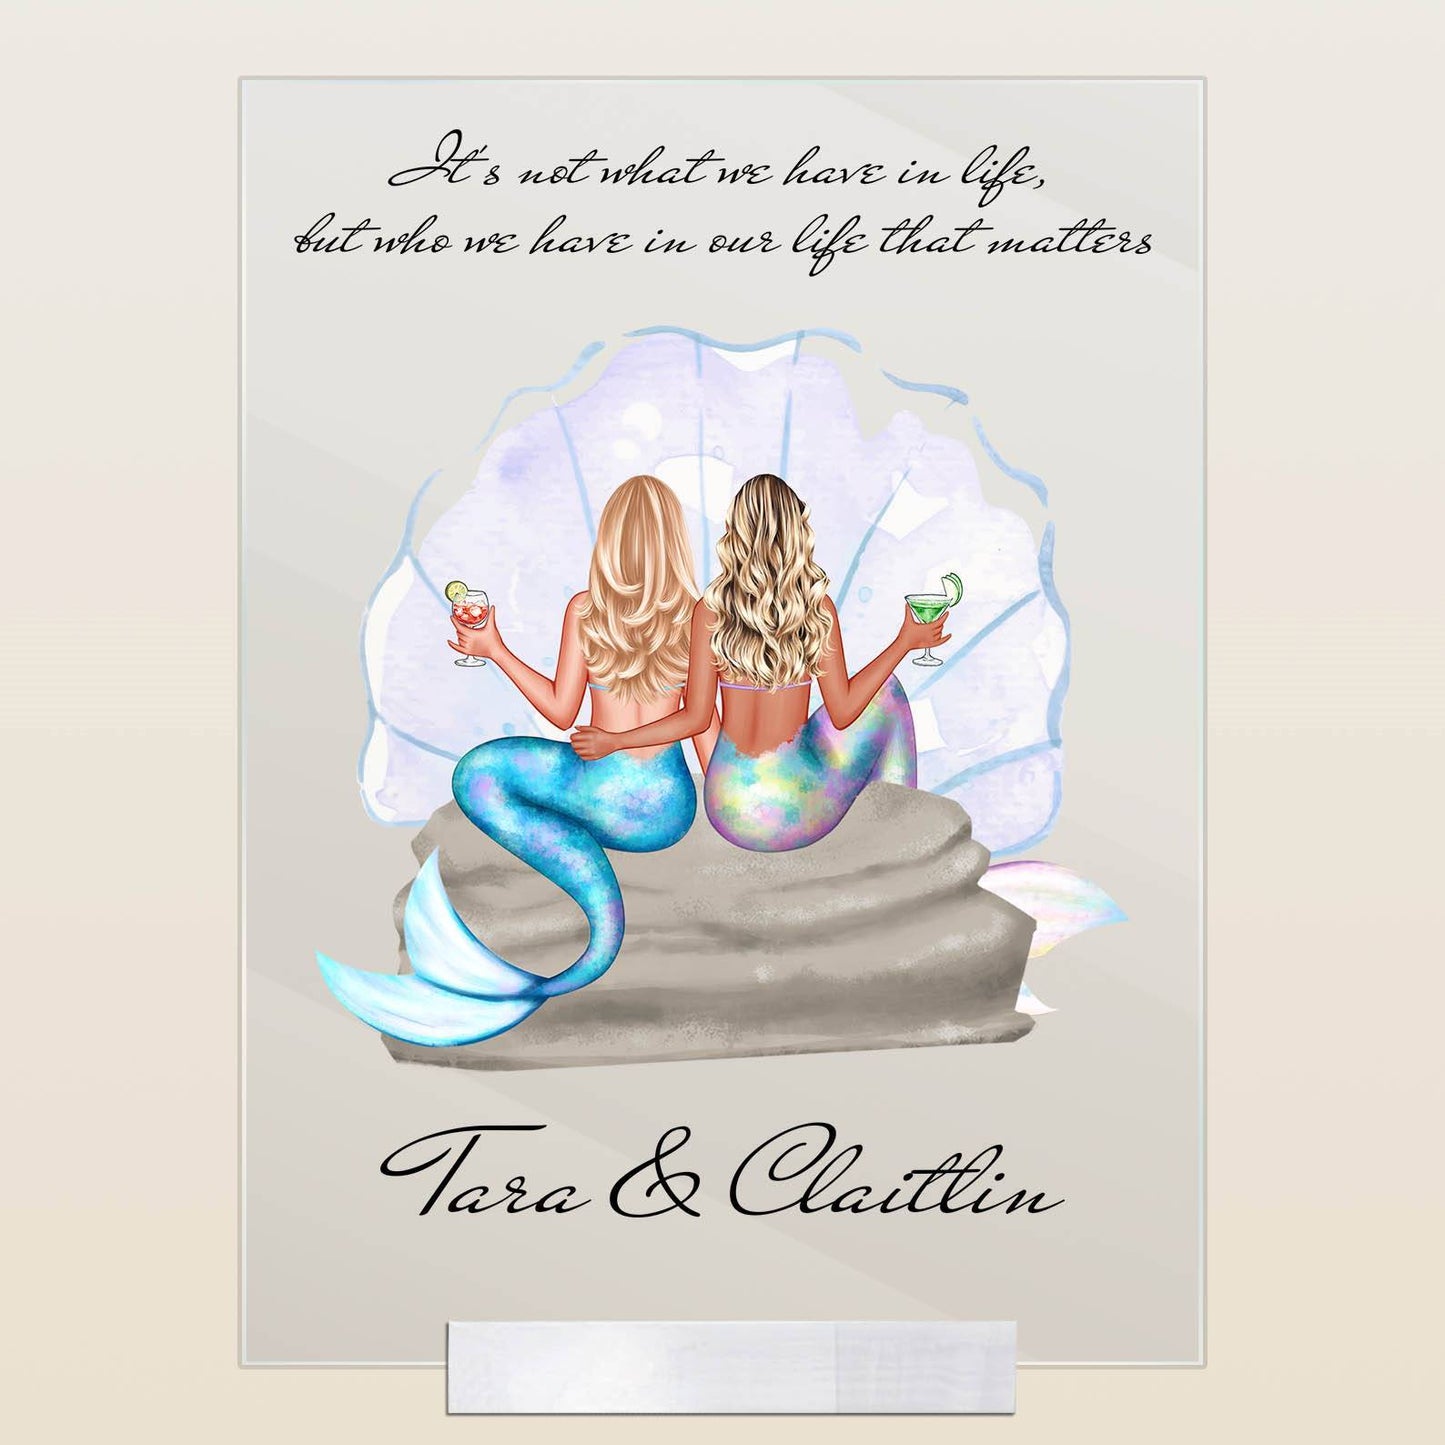 Who We Have In Our Life That Matters - Personalized Acrylic Plaque - Gift For Girls, Mermaid Sisters, Friends